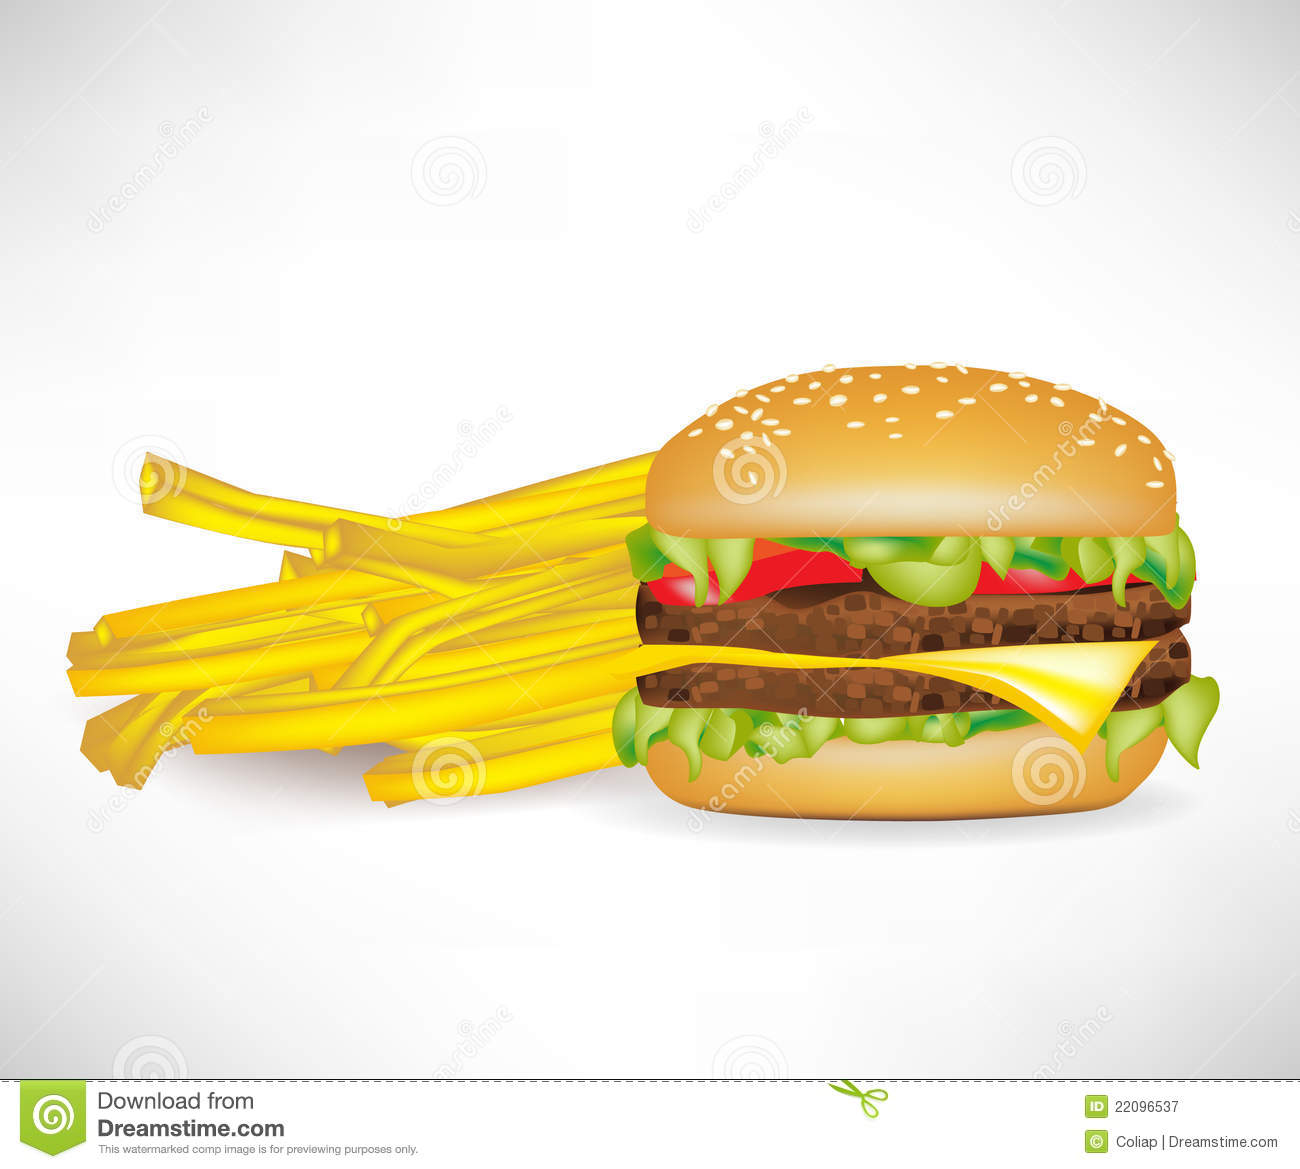 Fastfood Burger And French Fries Royalty Free Stock Photography